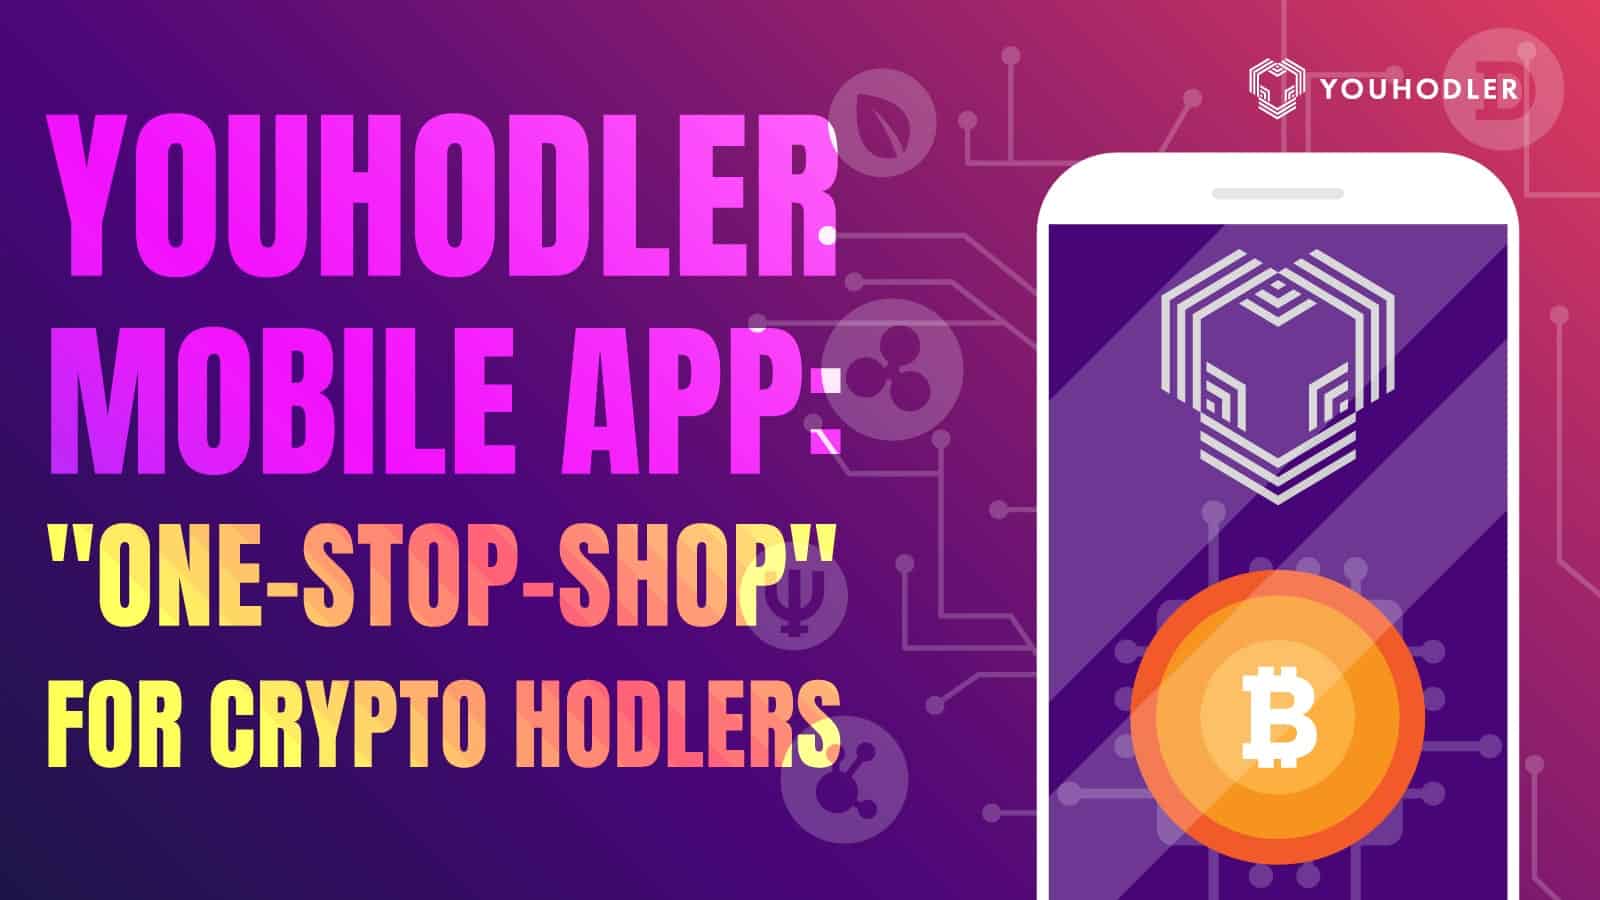 YouHodler Mobile App: One-Stop-Shop For Crypto HODLers